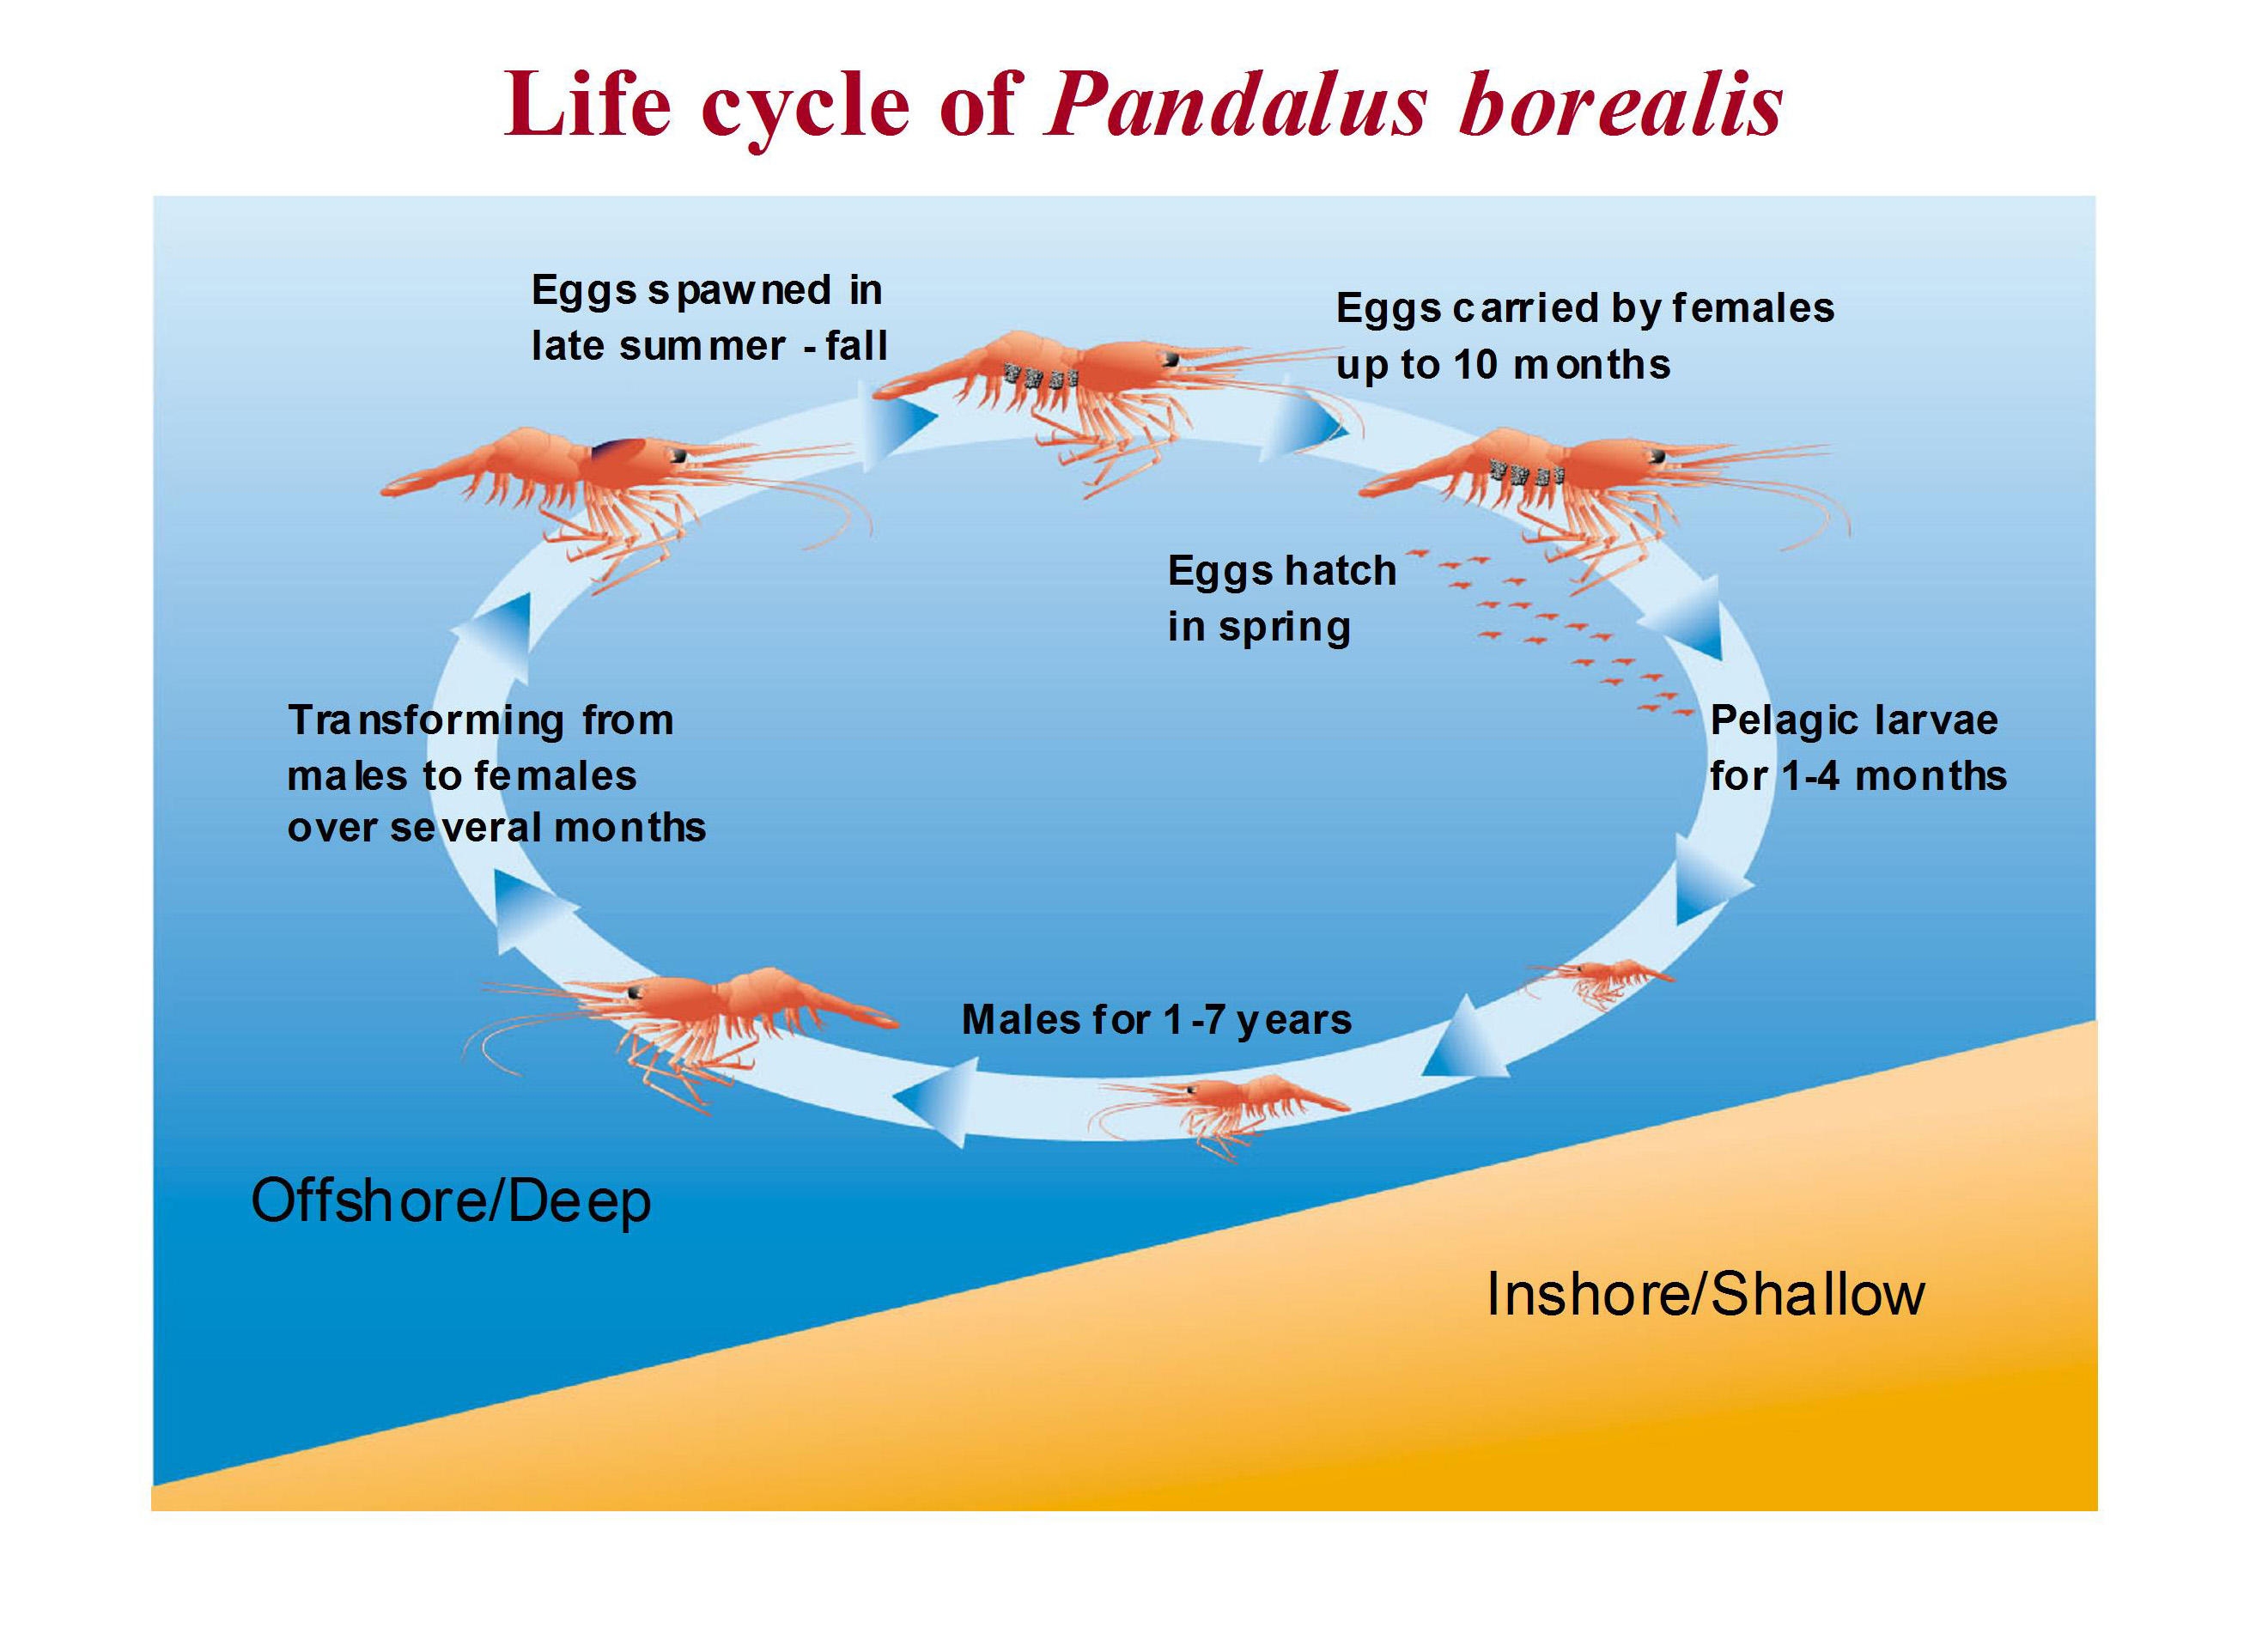 Life cycle of Northern shrimp: Pelagic larvae for 1-4 months. Males for 1-7 years. Transforming from males to females over several months. Eggs spawned in late summer-fall. Eggs carried by females up to 10 months. Eggs hatch in Spring.